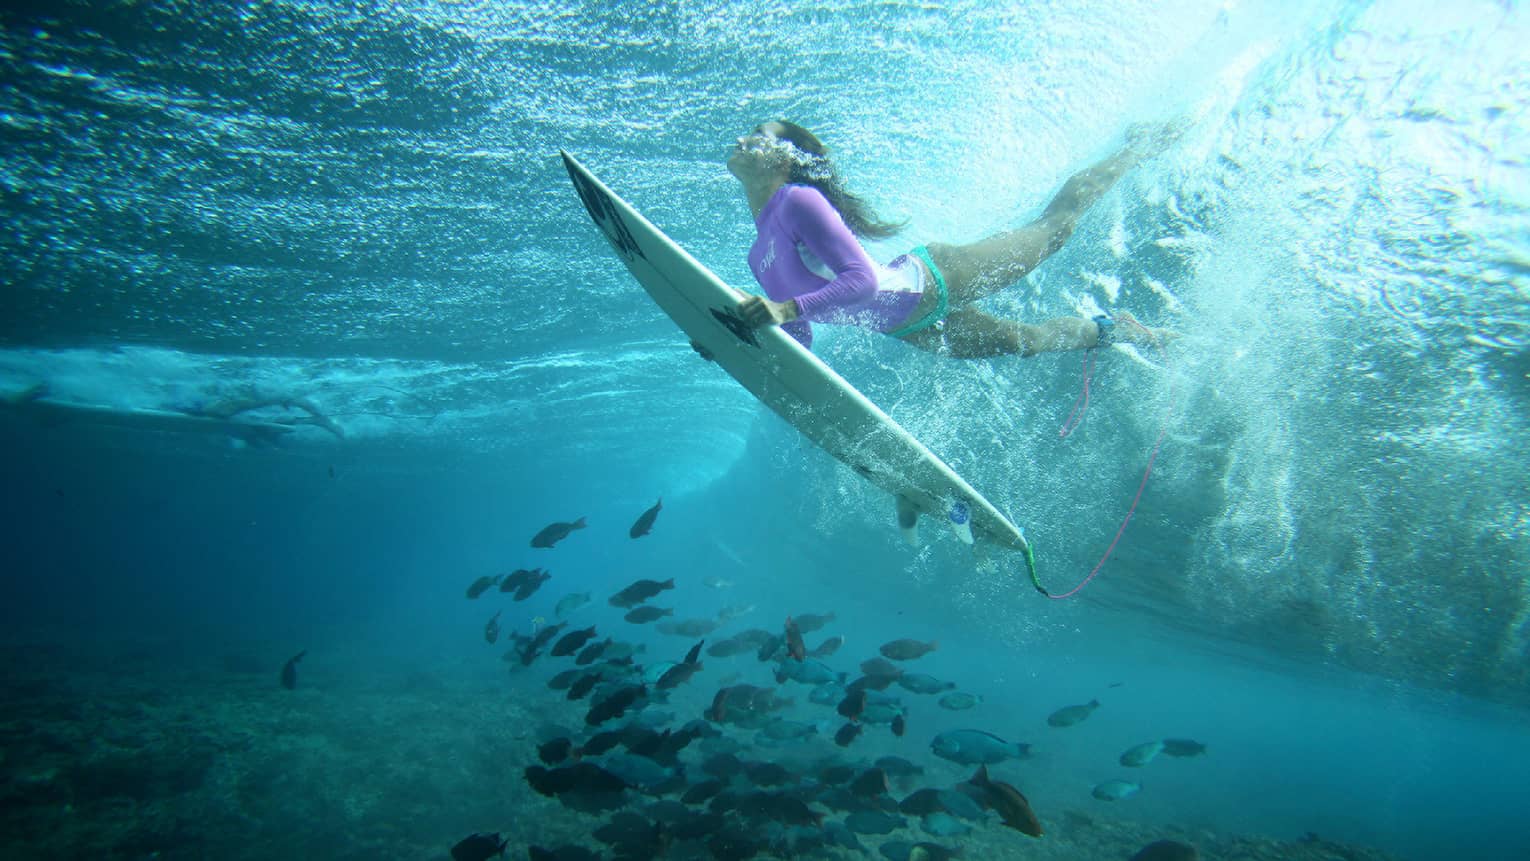 Céline Gehret, ascending from the water above a school of fish as she surfs in the Maldives